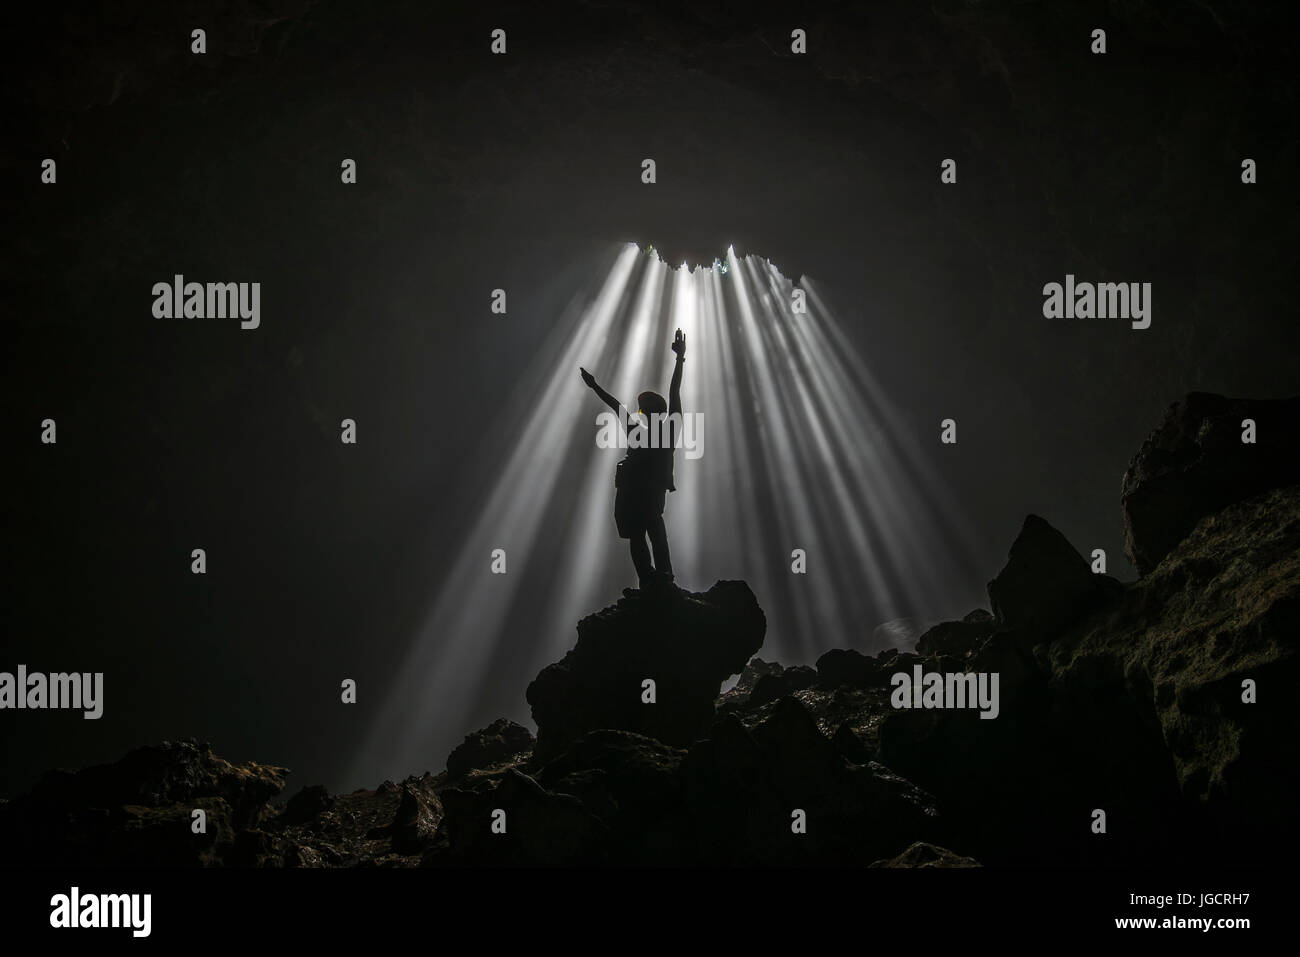 Silhouette of a man standing in a cave with arms raised, Jomblang, Central Java, Indonesia Stock Photo